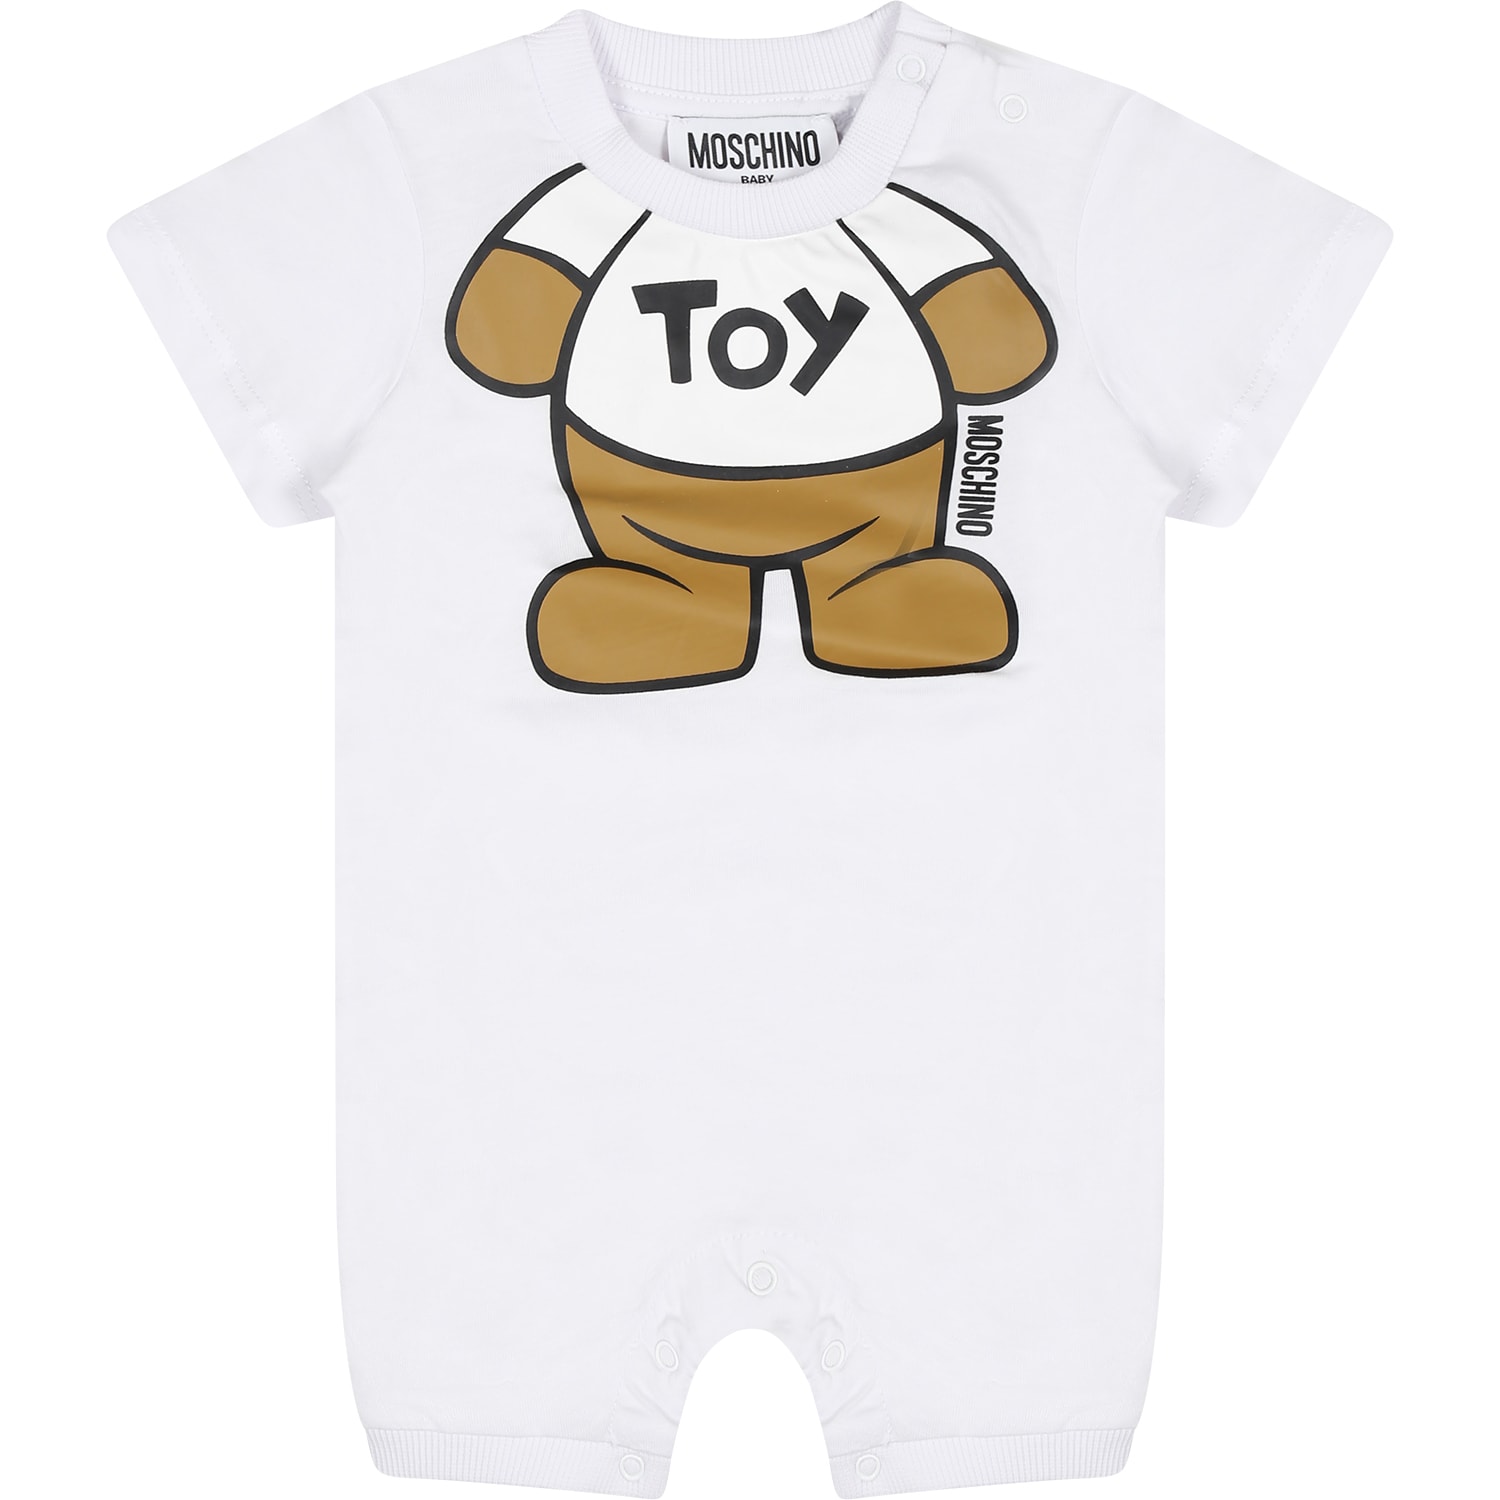 Moschino White Romper For Baby Kids With Teddy Bear